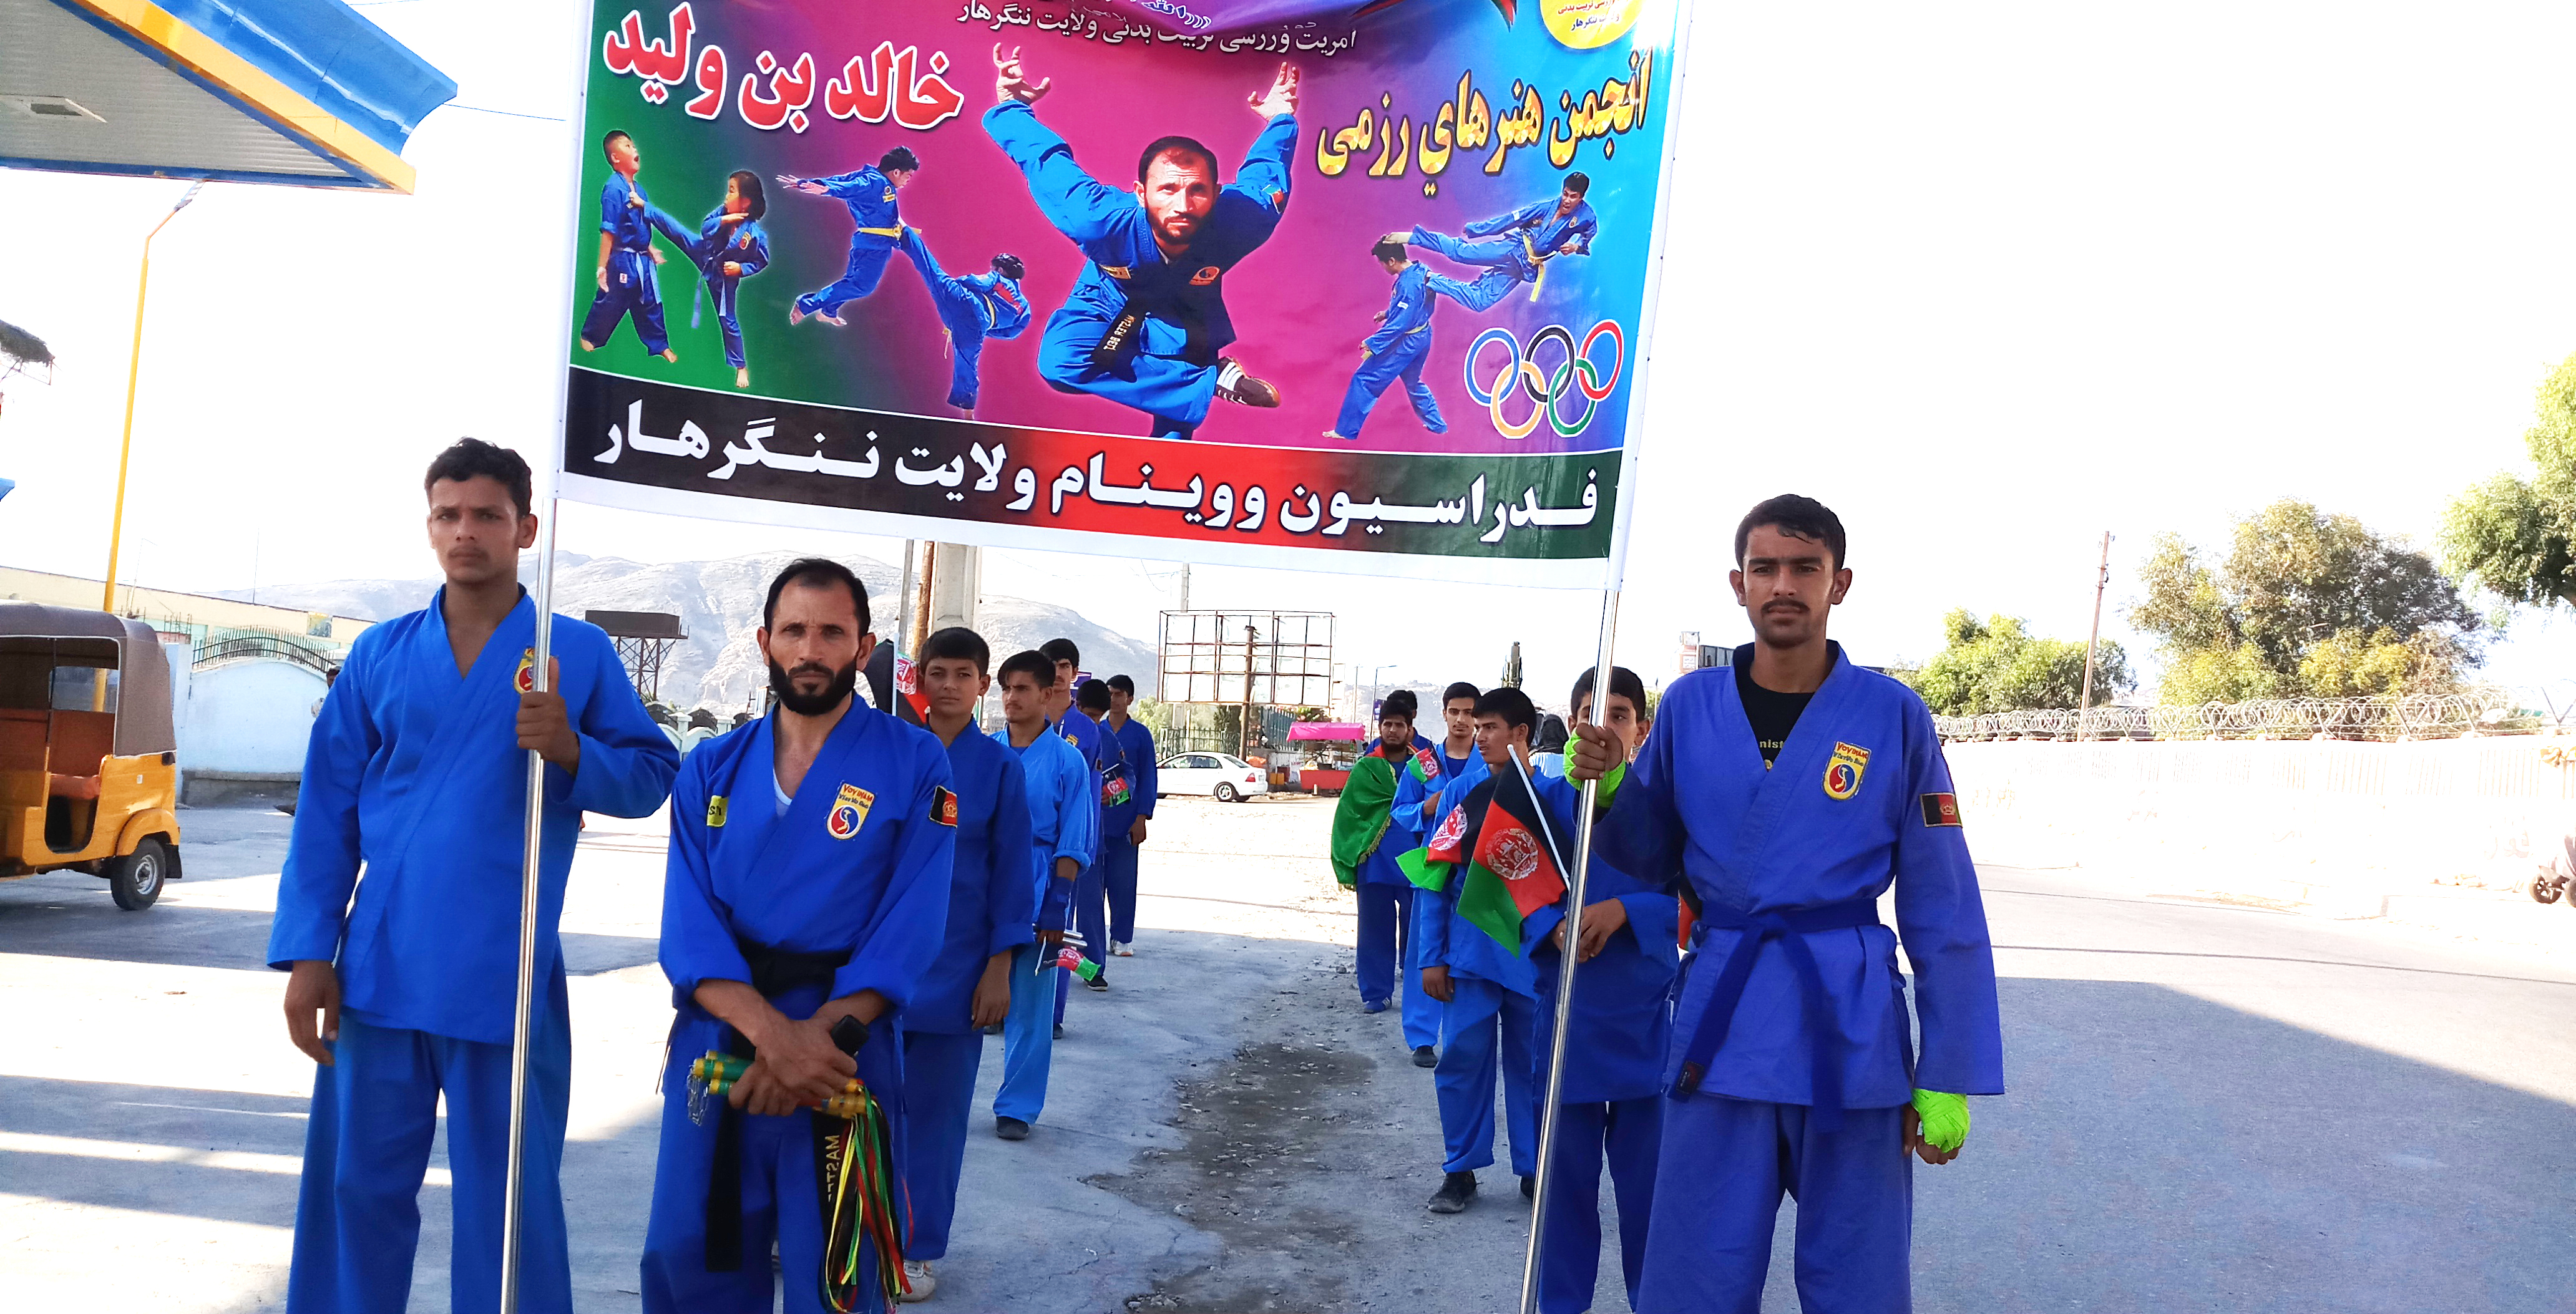 Vietnam sports in the eastern zone of Afghanistan